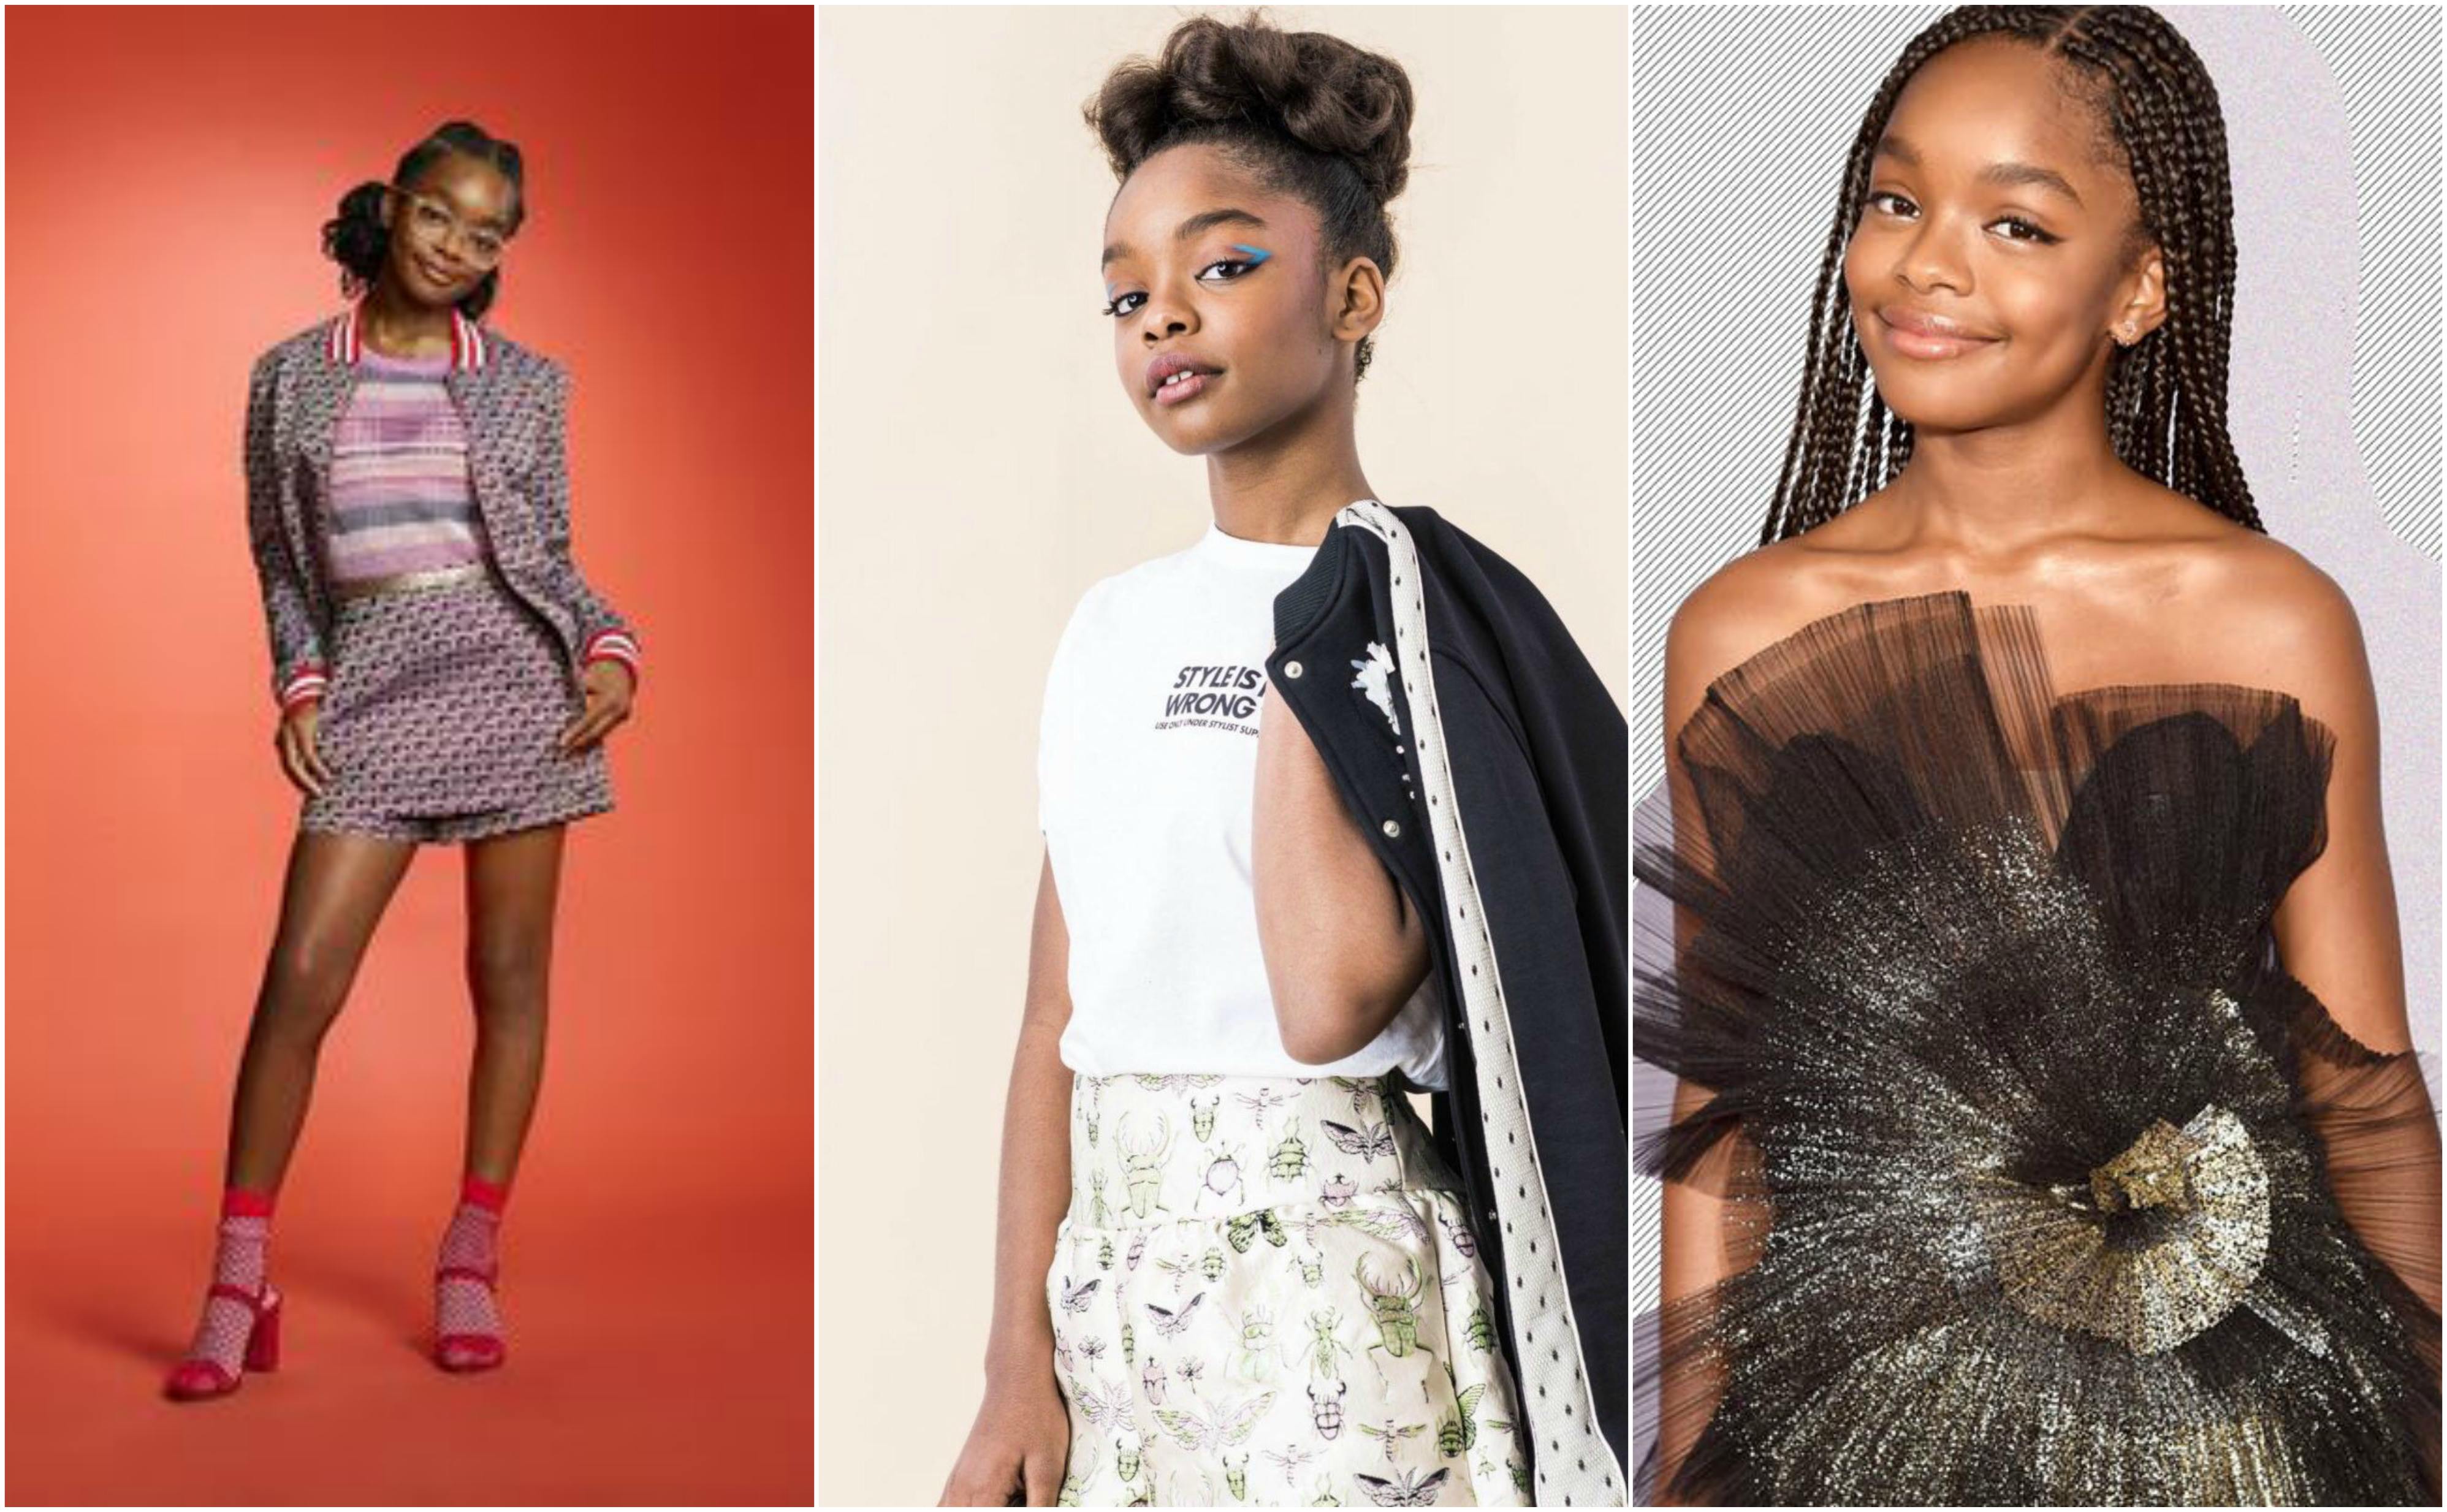 Marsai Martin Wiki, Biography, Age, Birthdate, Family, Parents, Movies, Song, Tv Series, Net worth & More